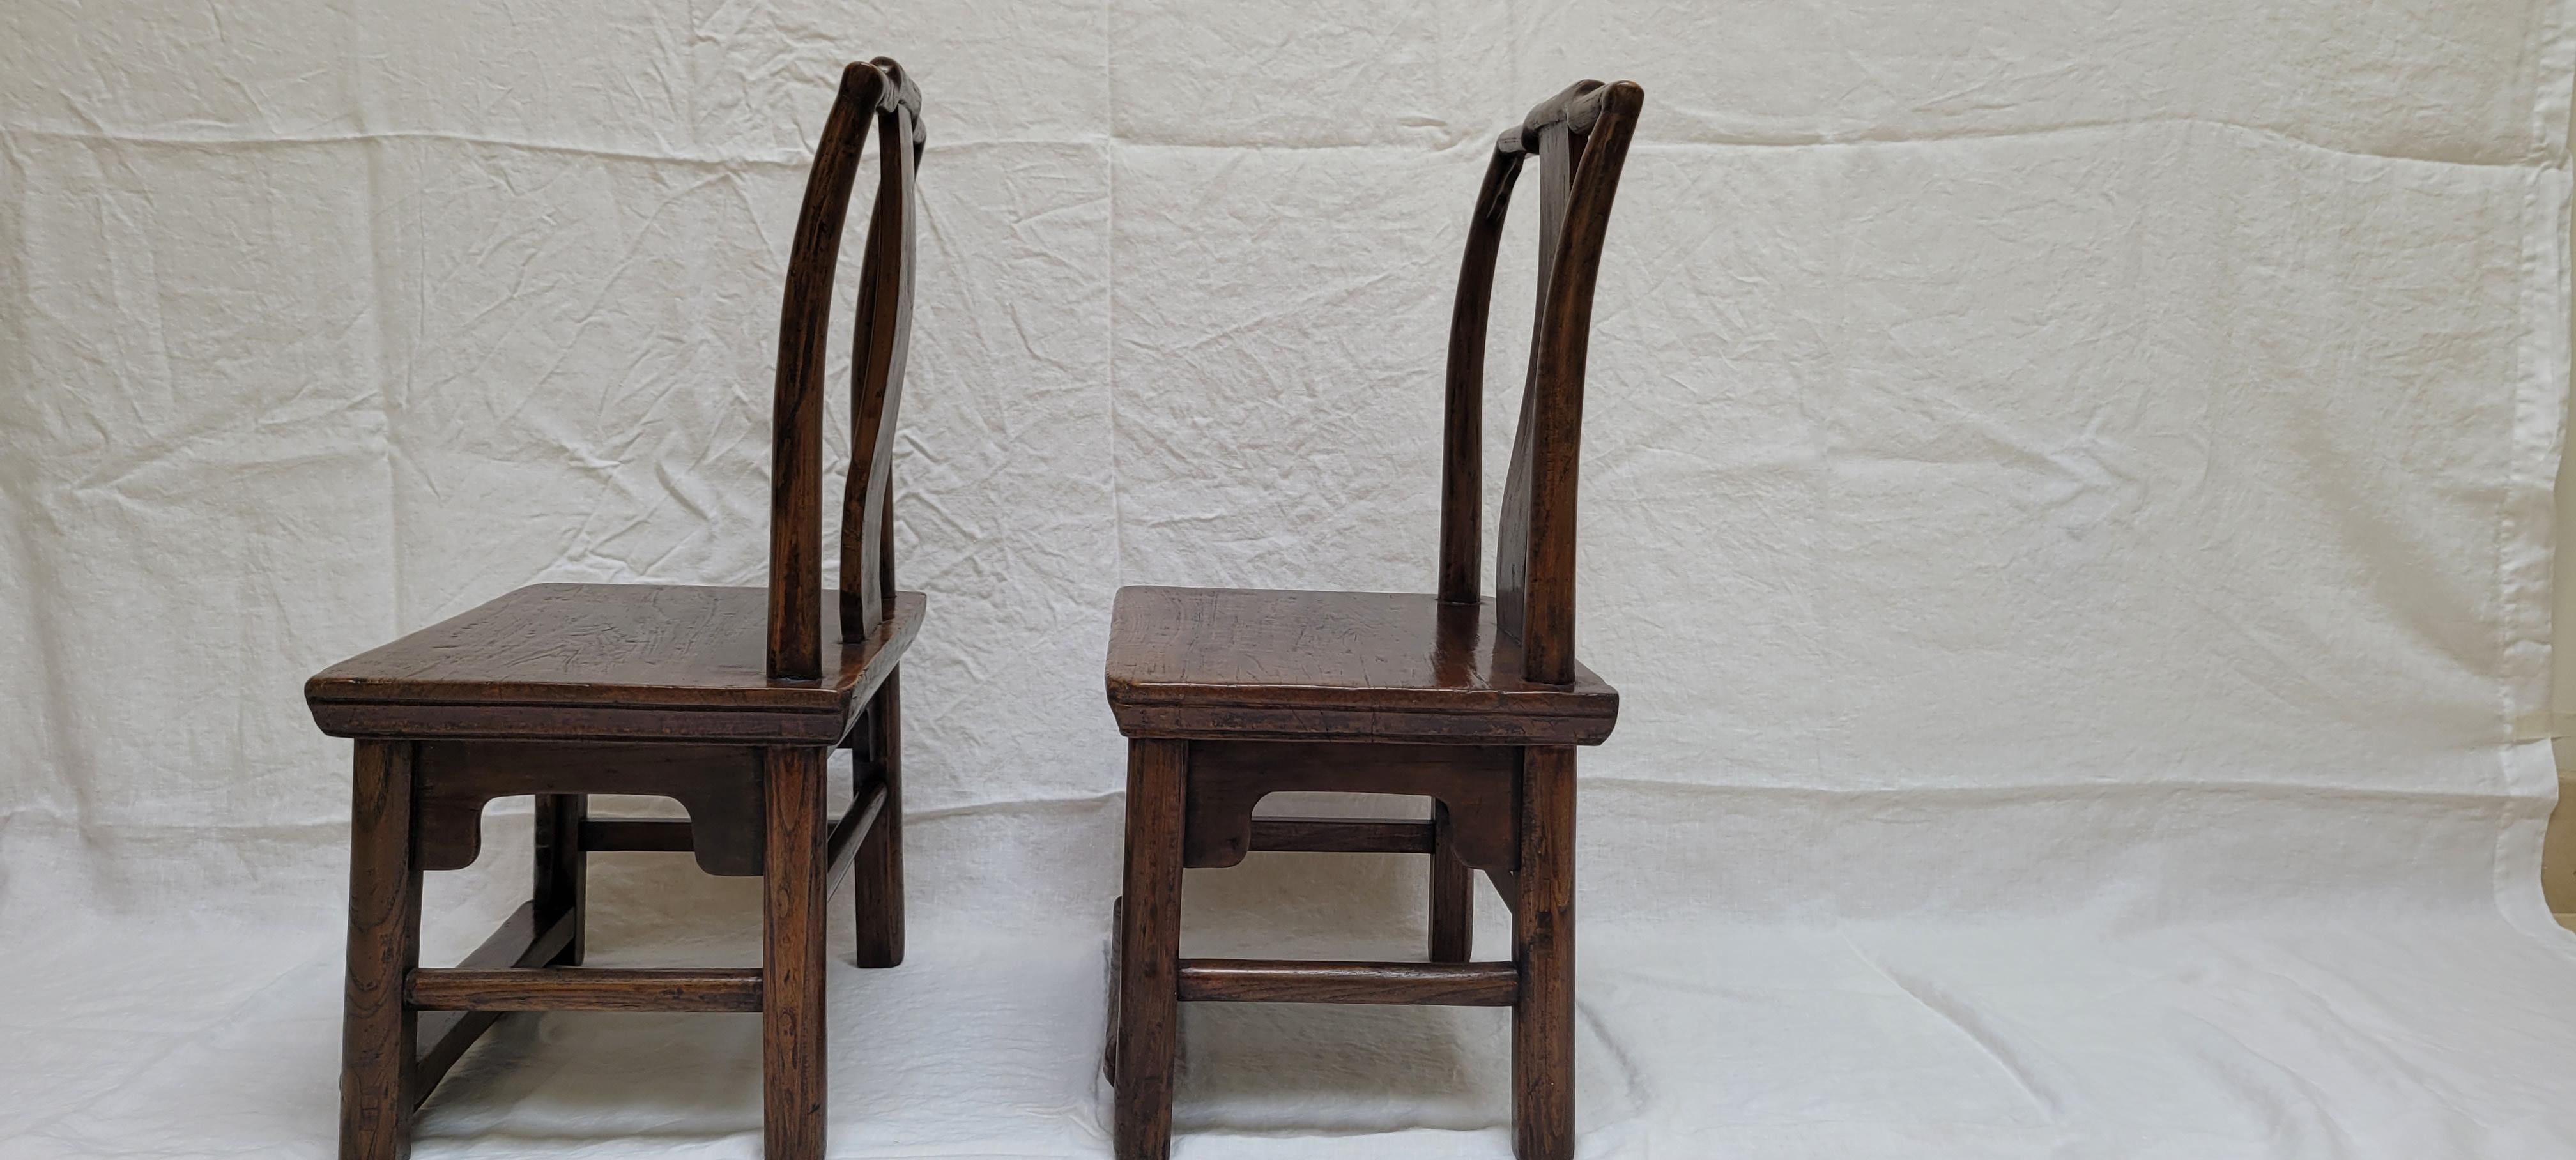 This pair of children’s chairs has a back frame in the Southern Official hat style. The seat is made of a solid plank of wood. The aprons are done in the traditional Jin style with the trailing plant motif as decoration. The chairs were originally